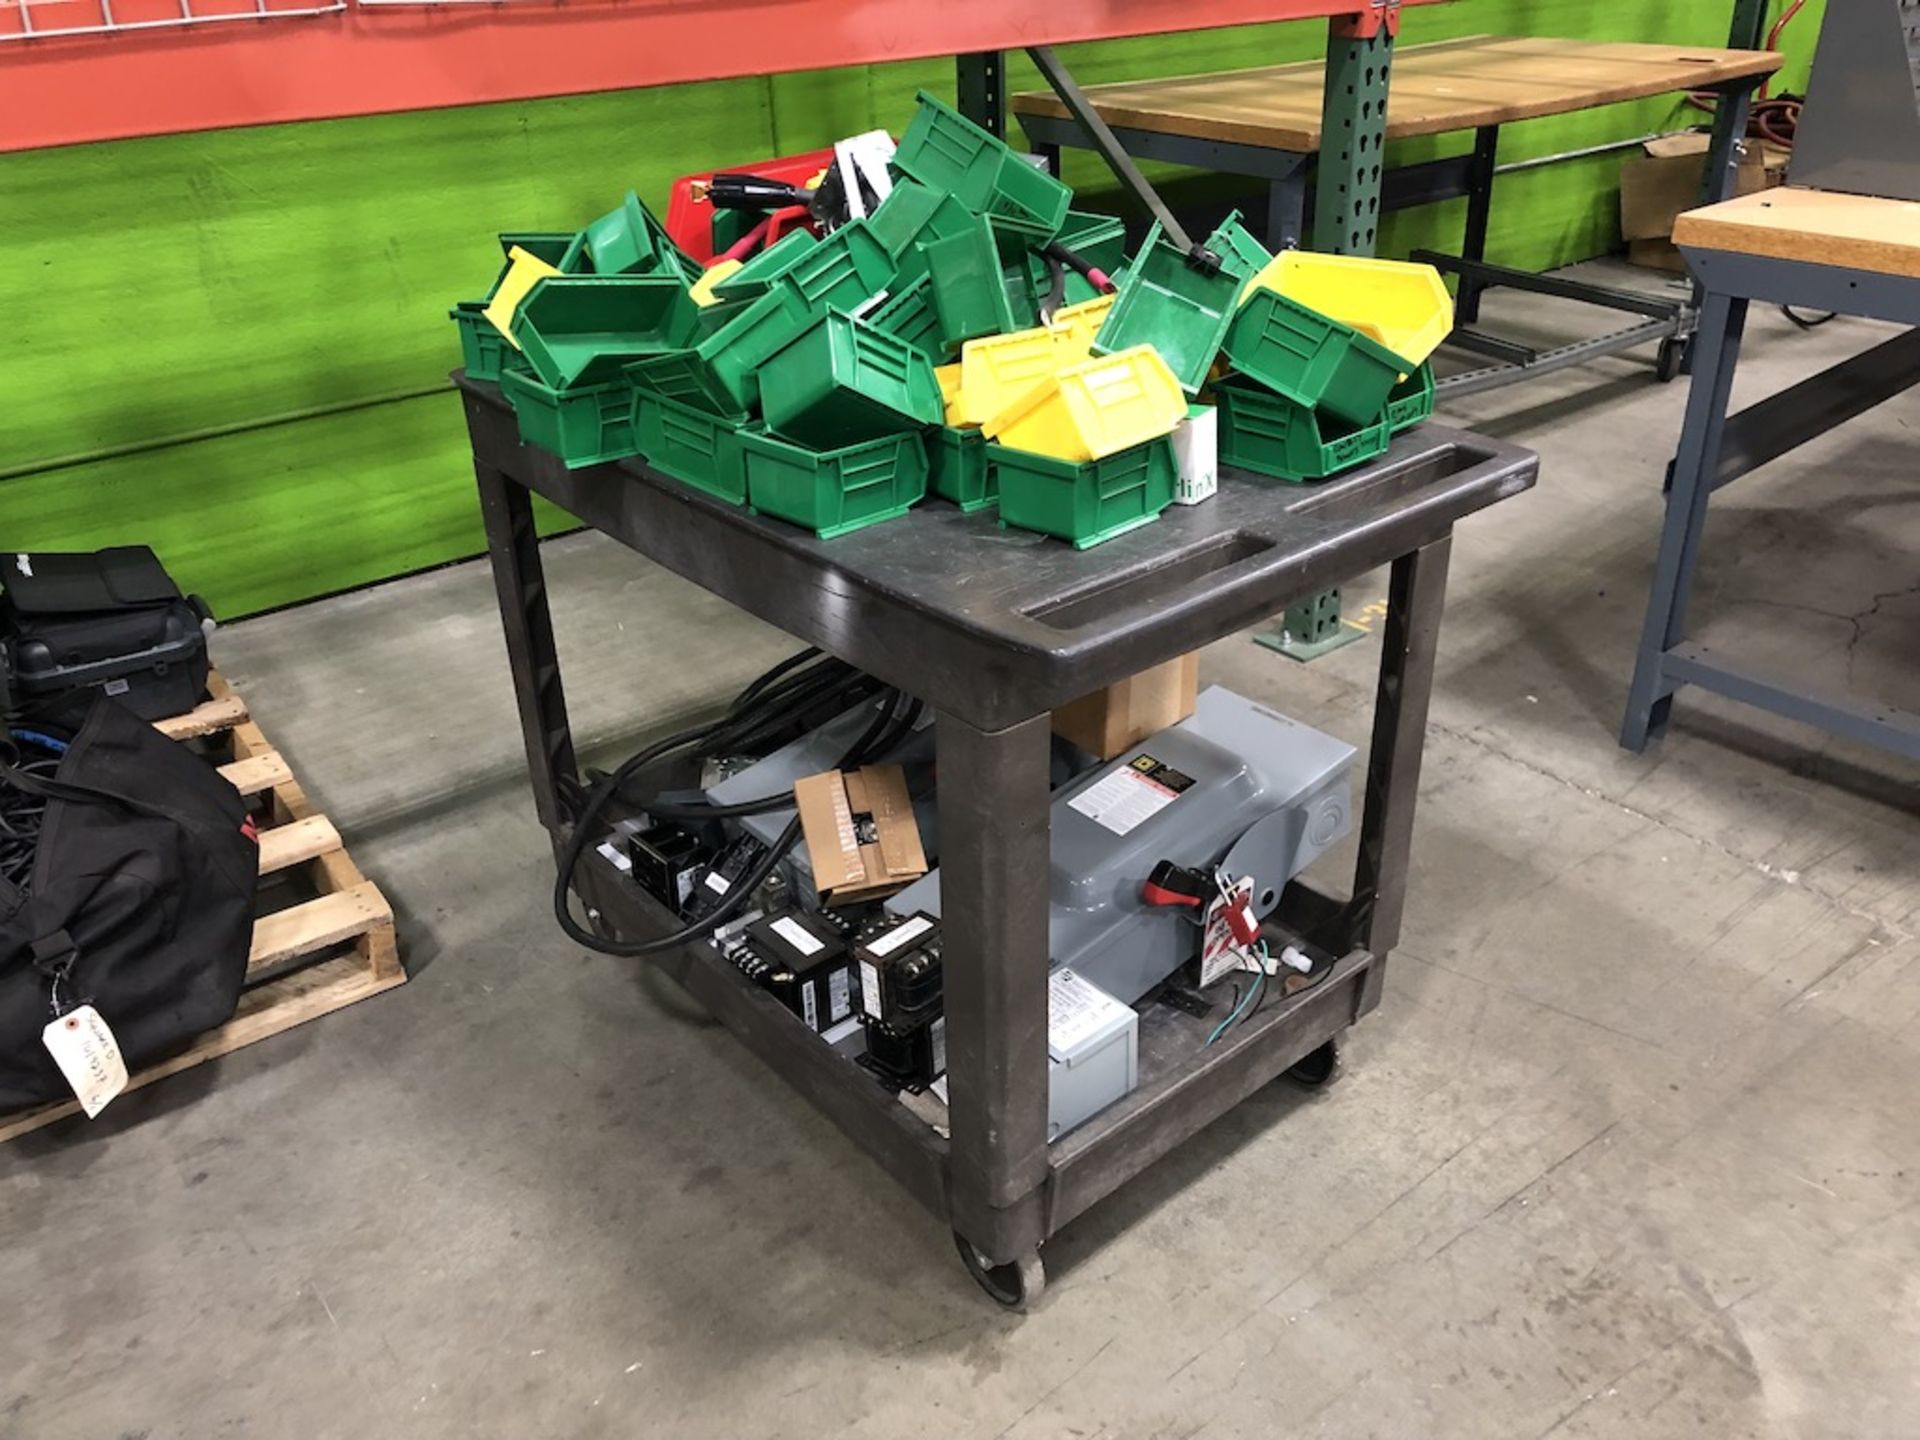 PLASTIC CART ( CONTNETS NOT INCLUDED ) 40IN L X 25 1/4IN W X 32IN H   SCHNEIDER ELECTRIC- 6611